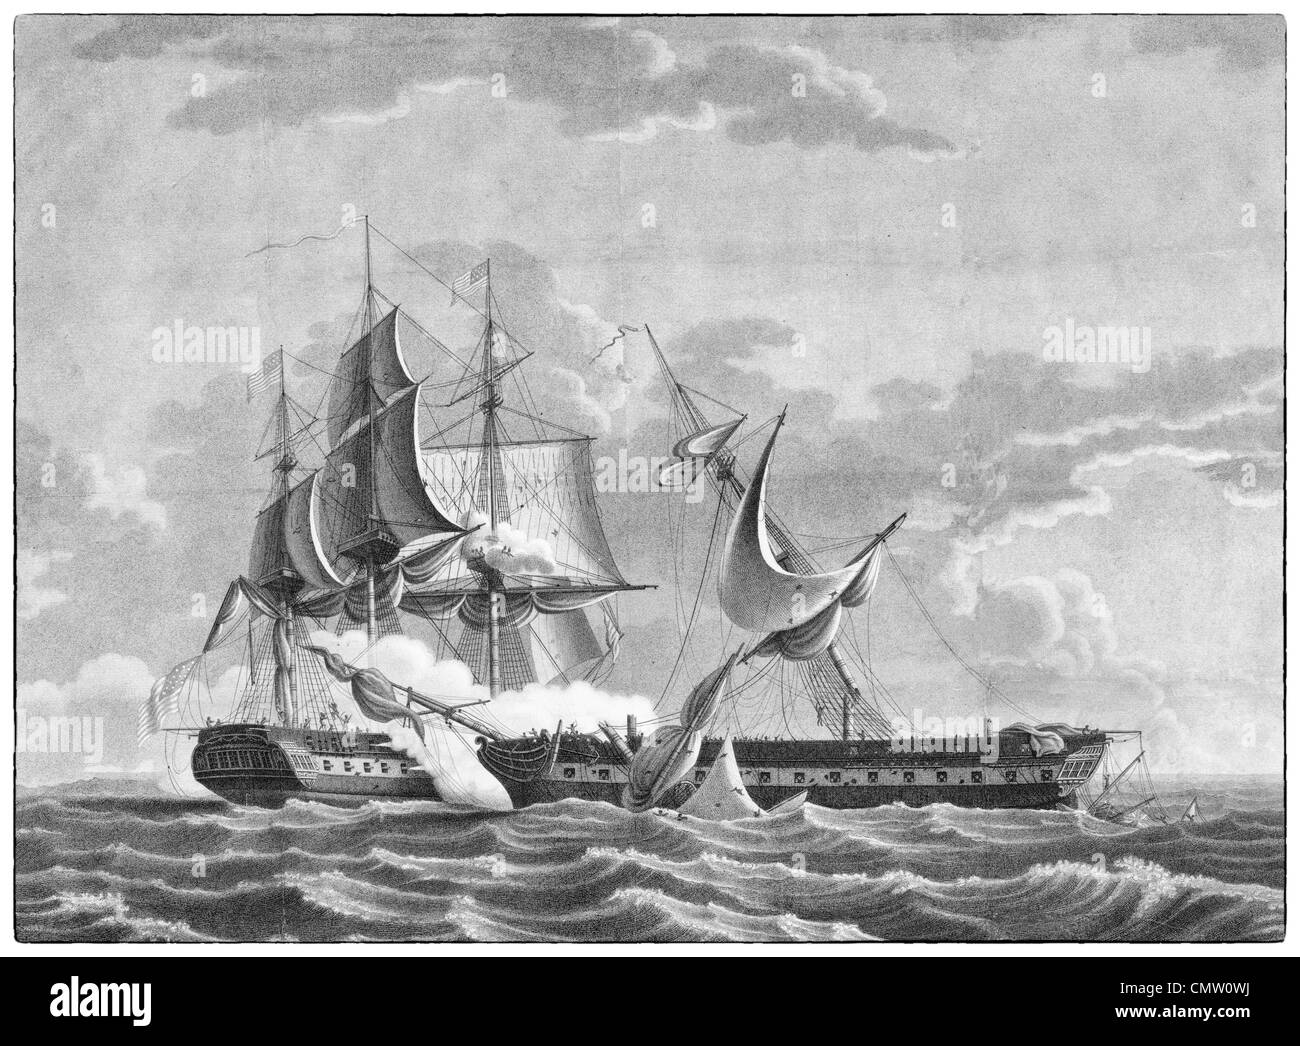 U.S. Frigate Constitution, Isaac Hull, commander, capturing his Britannic Majesty's frigate Guerriere, James R. Dacres, commander, during the War of 1812 Stock Photo